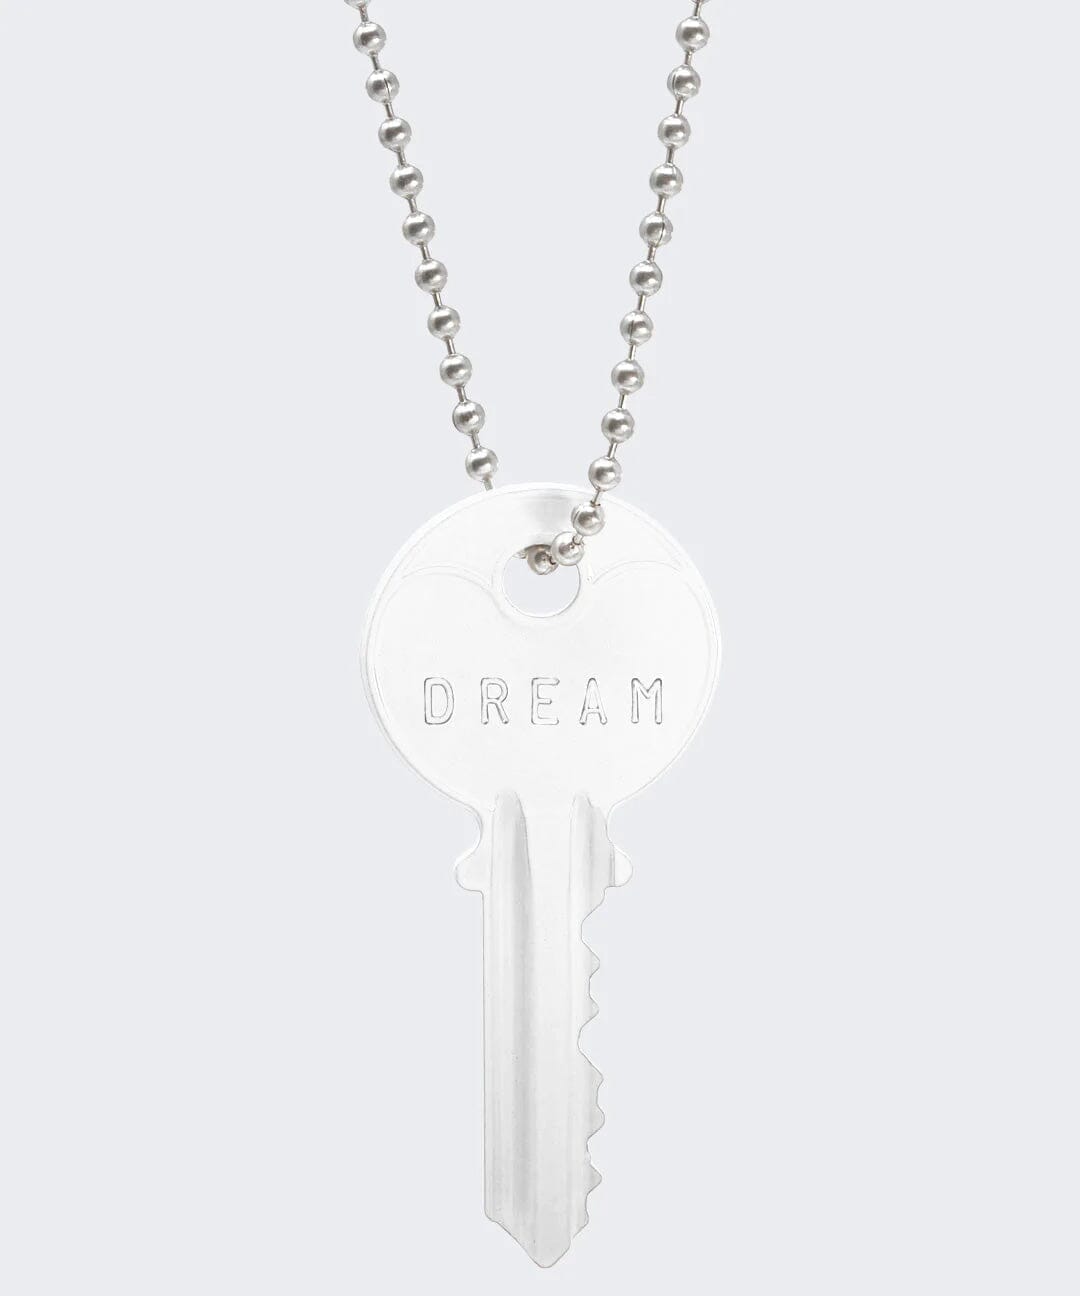 N - Ultra White Classic Ball Chain Key Necklace Necklaces The Giving Keys 